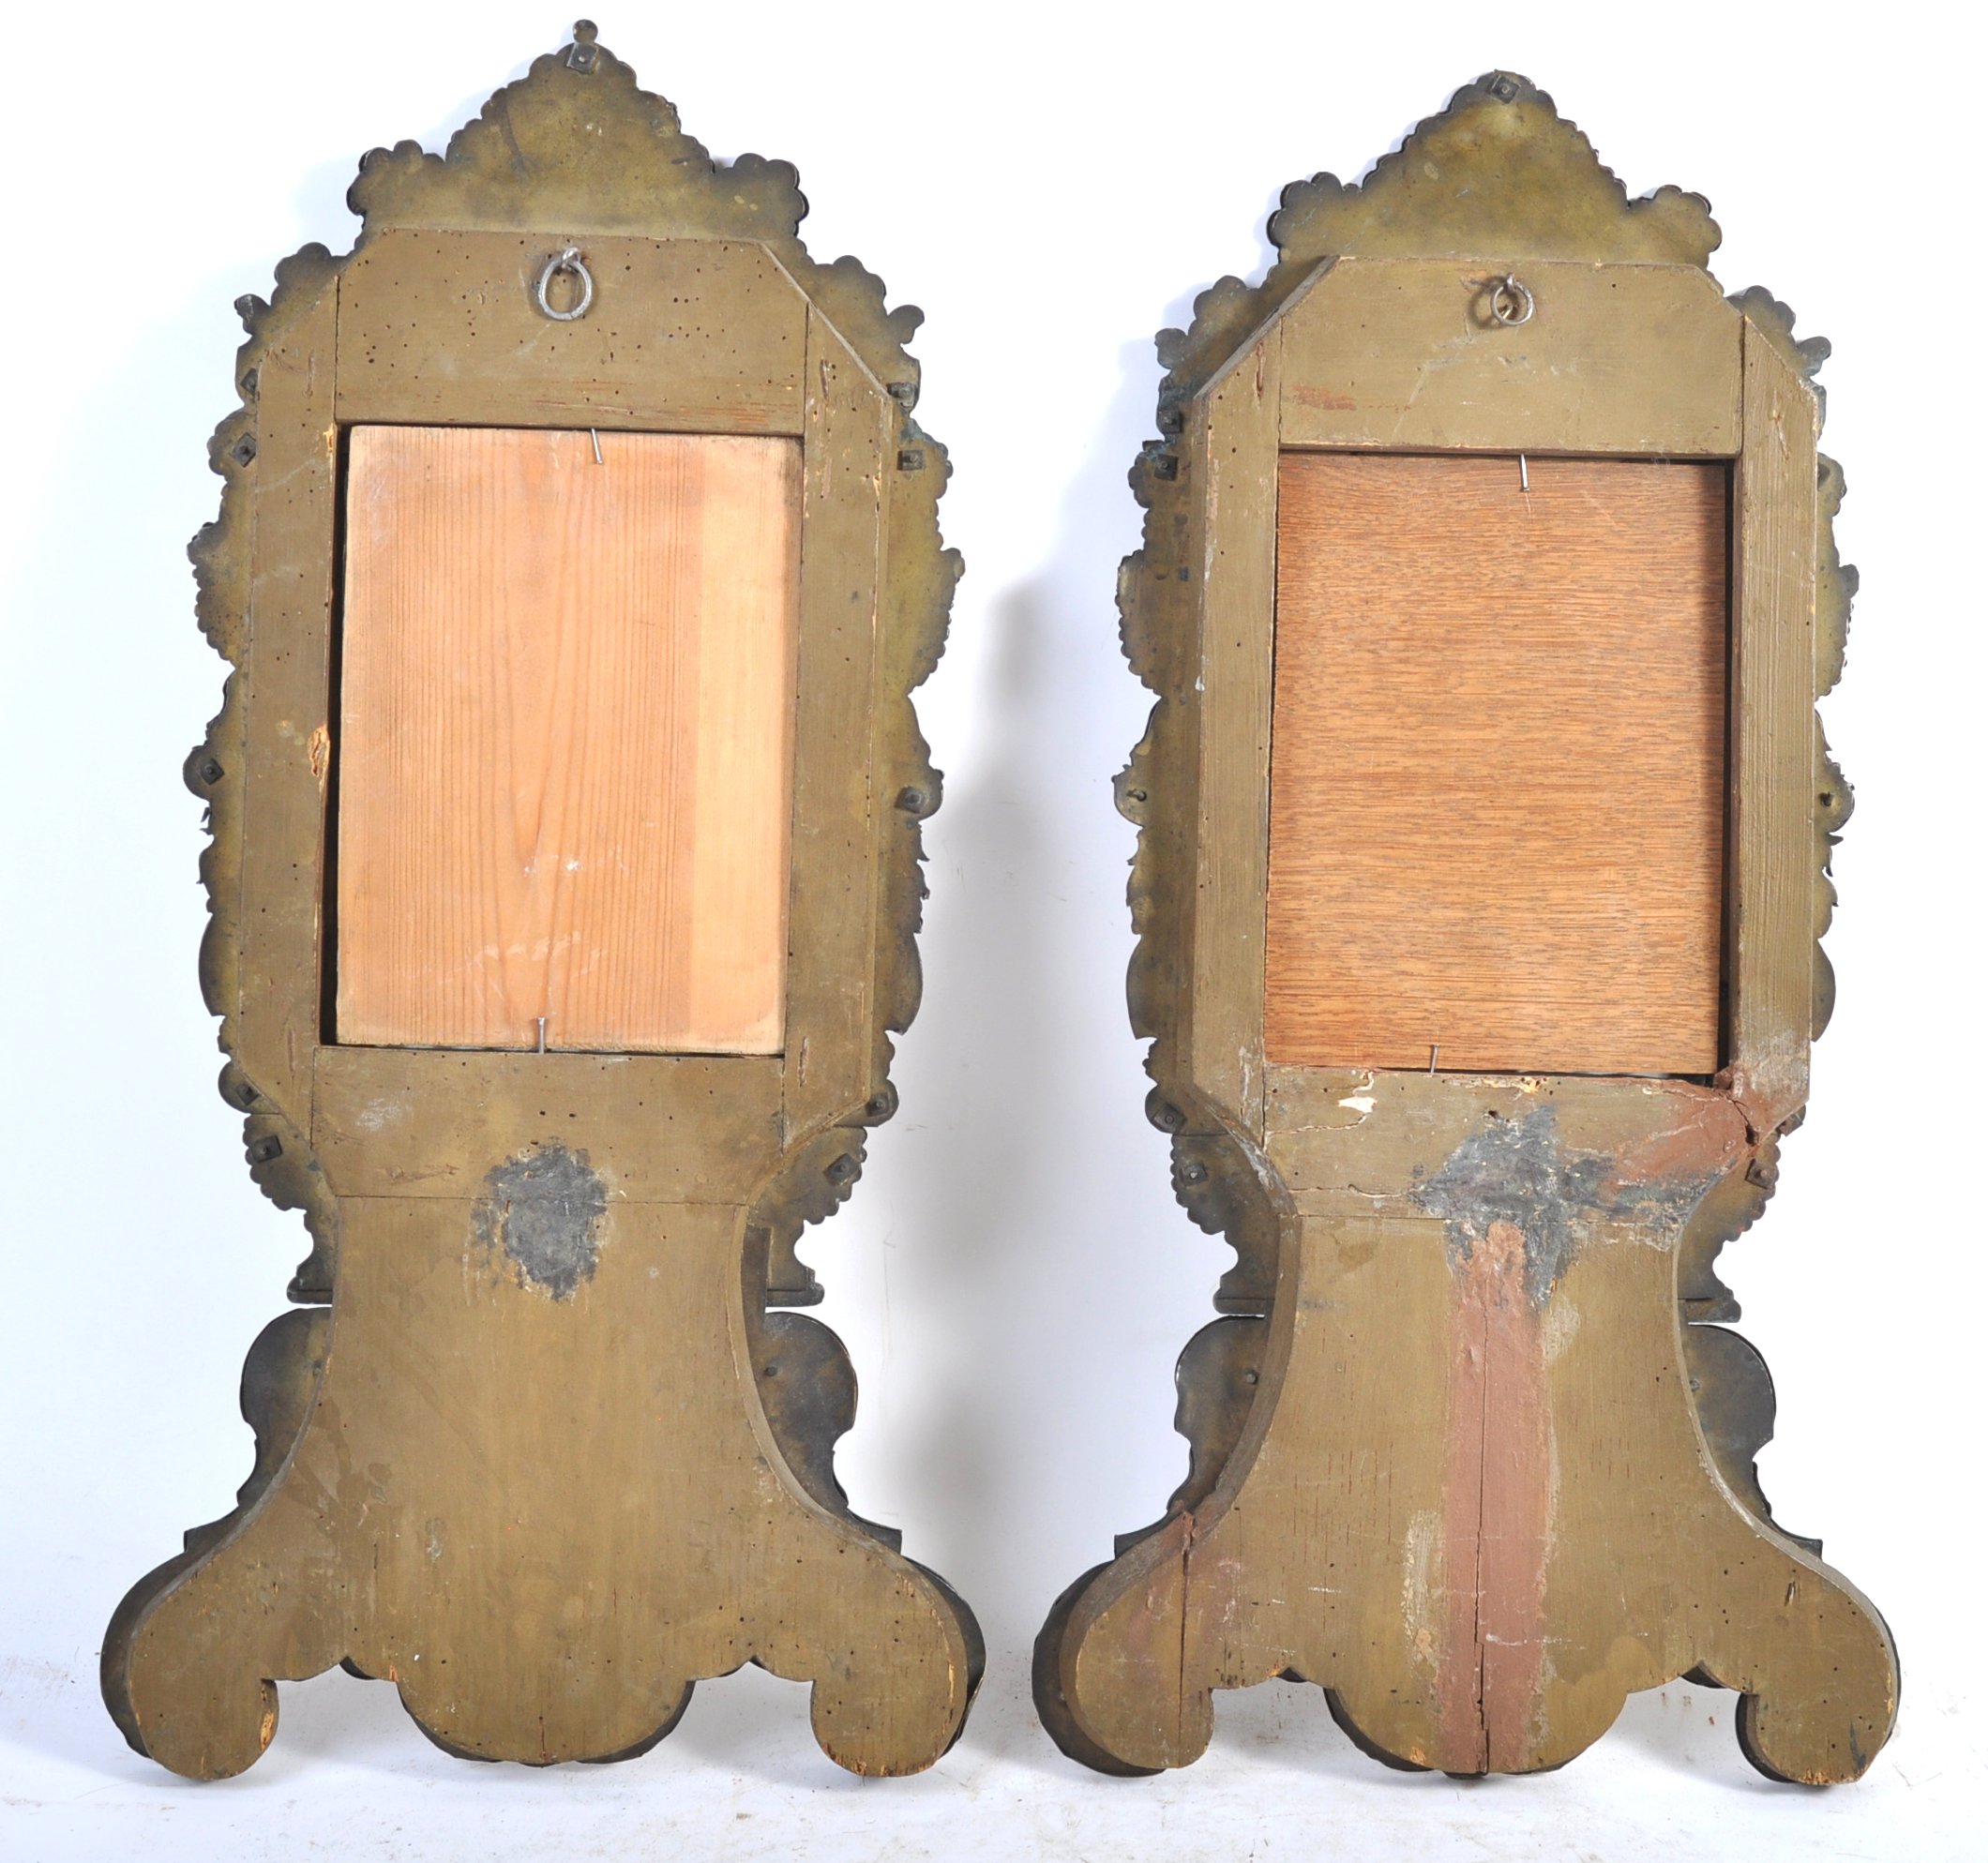 PAIR OF 18TH CENTURY ANTIQUE REPOUSSE BRASS PICTURE FRAMES - Image 7 of 7